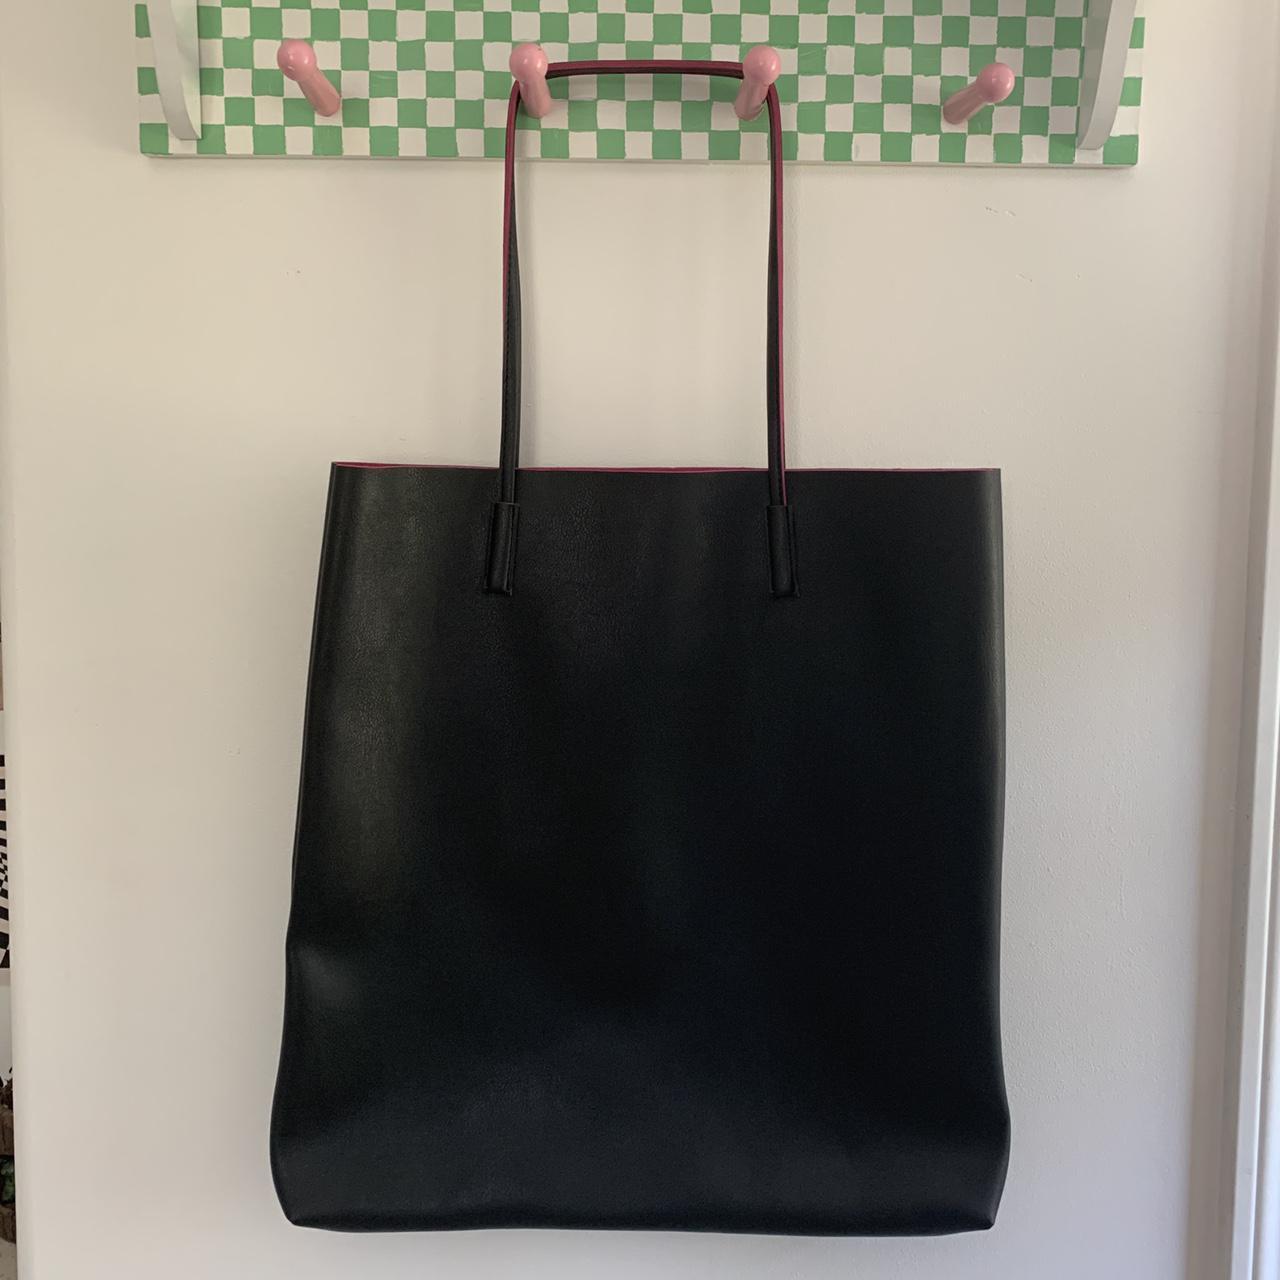 Blooming & Co. Women's Pink and Black Bag